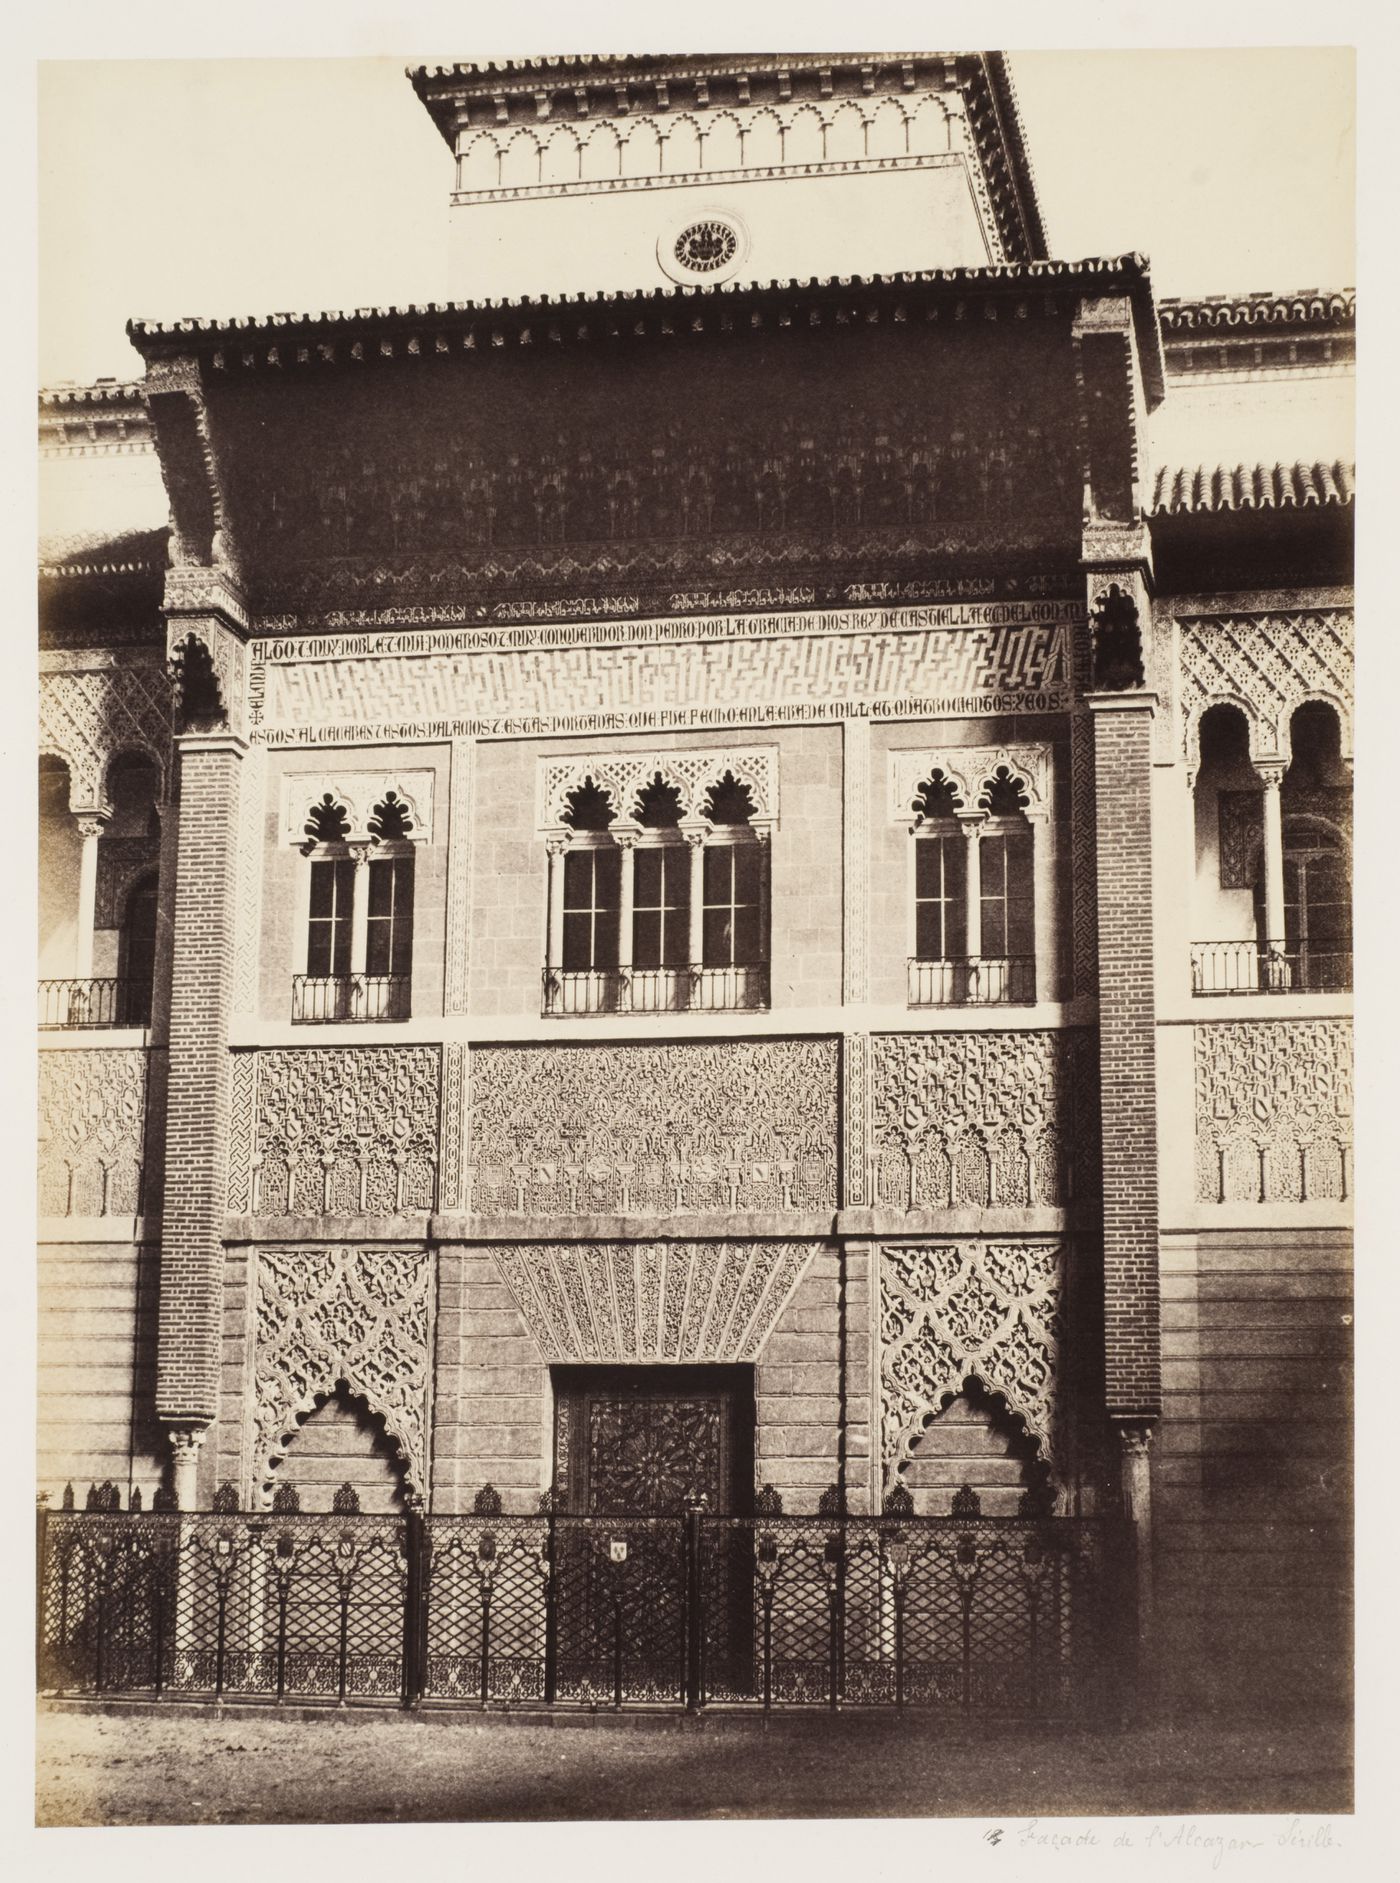 View of the facade of the royal palace (Alcazar) of Seville, Spain